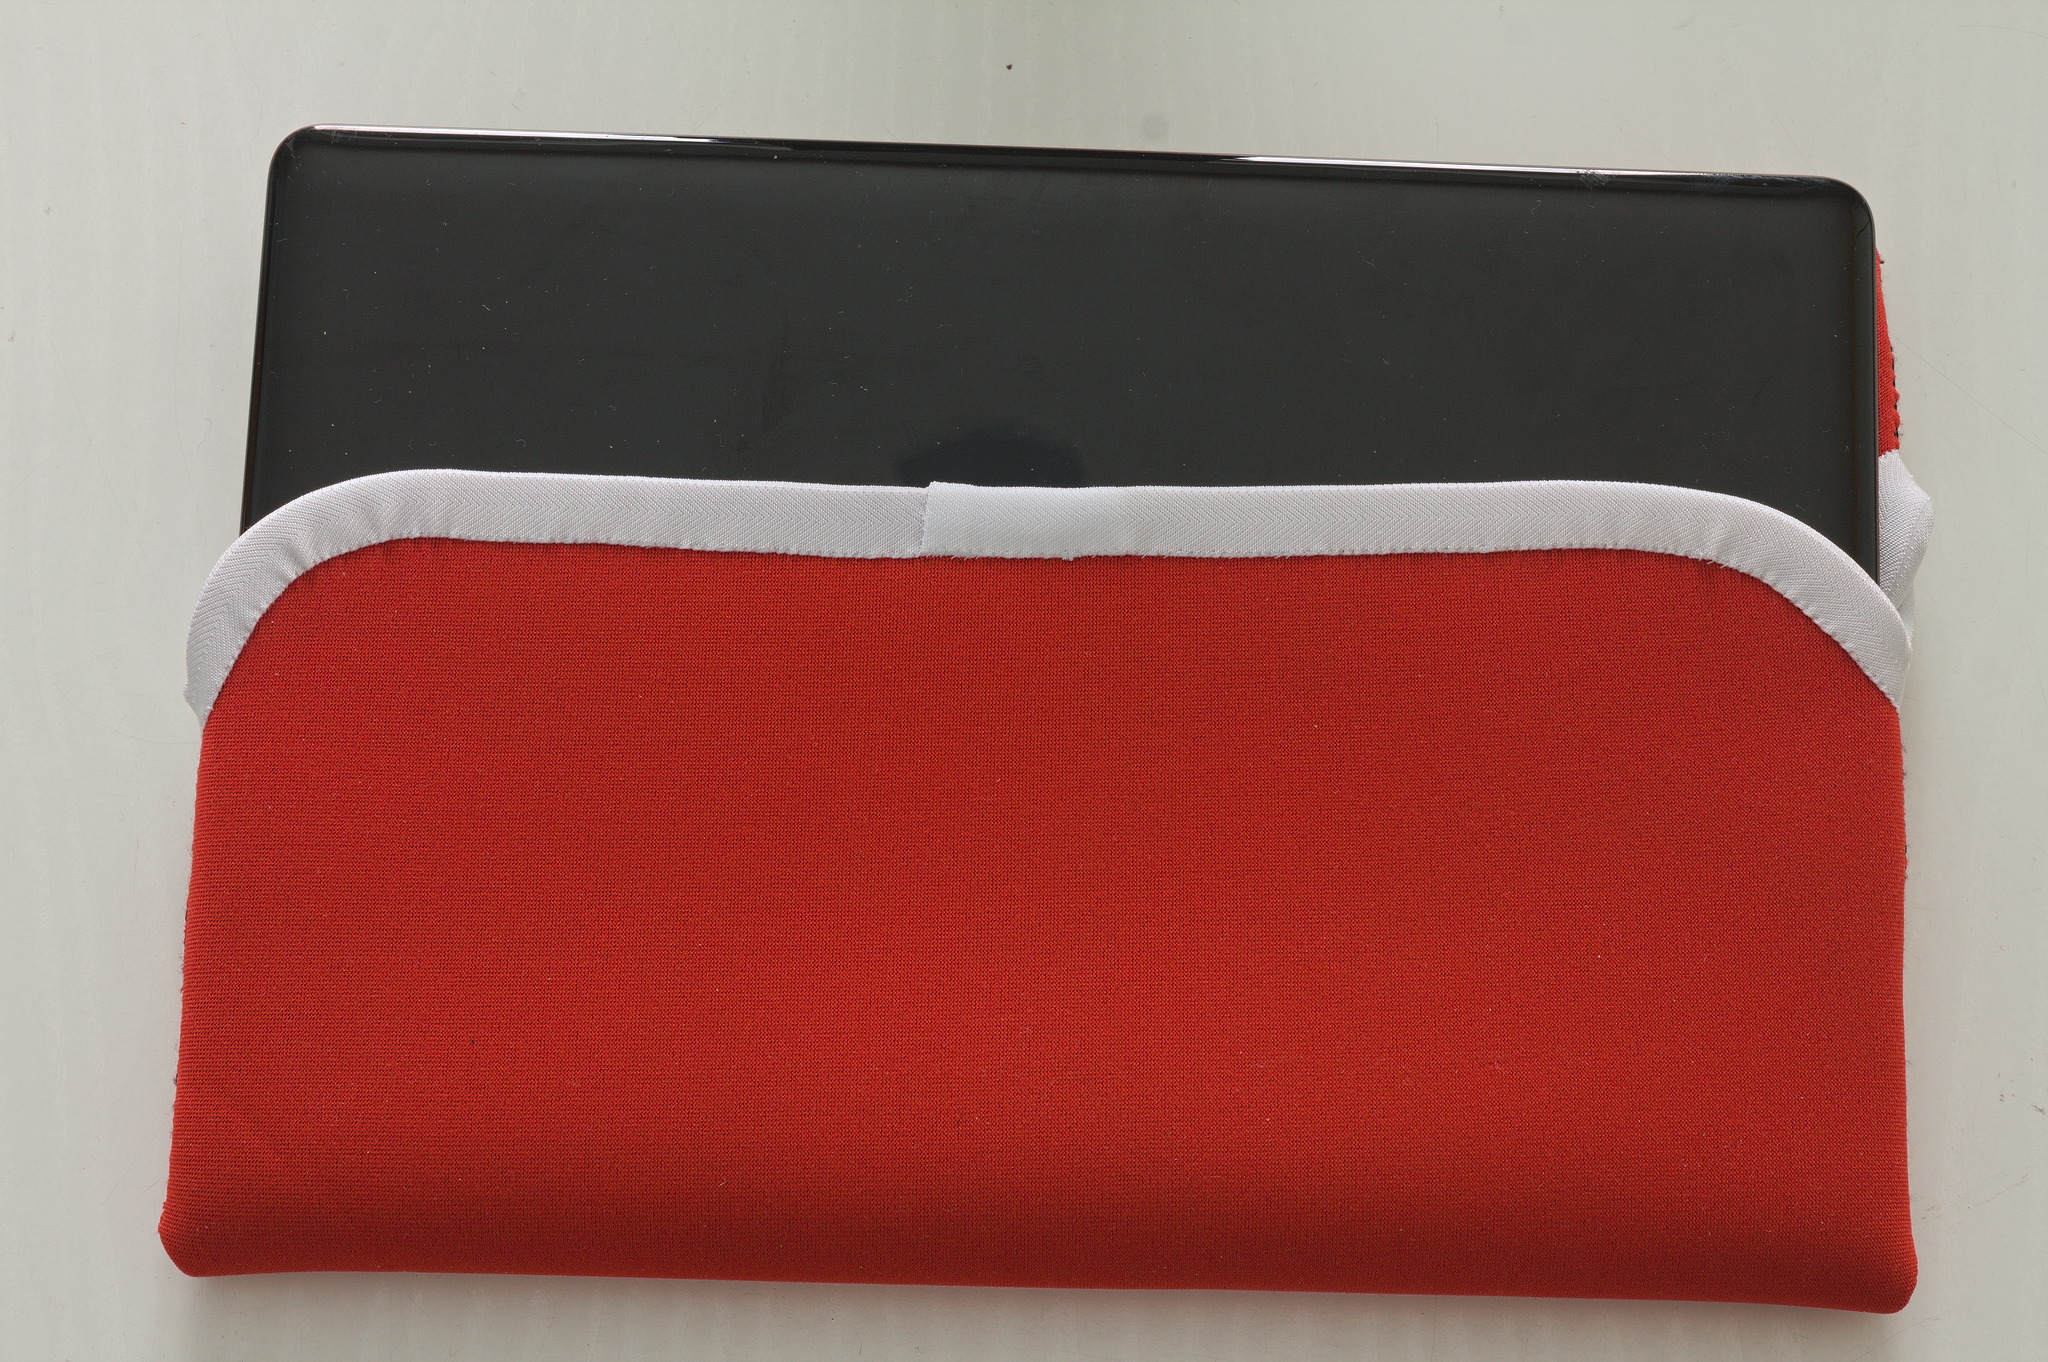 Picture of a red neoprene laptop sleeve, partially open with a laptop visible inside.